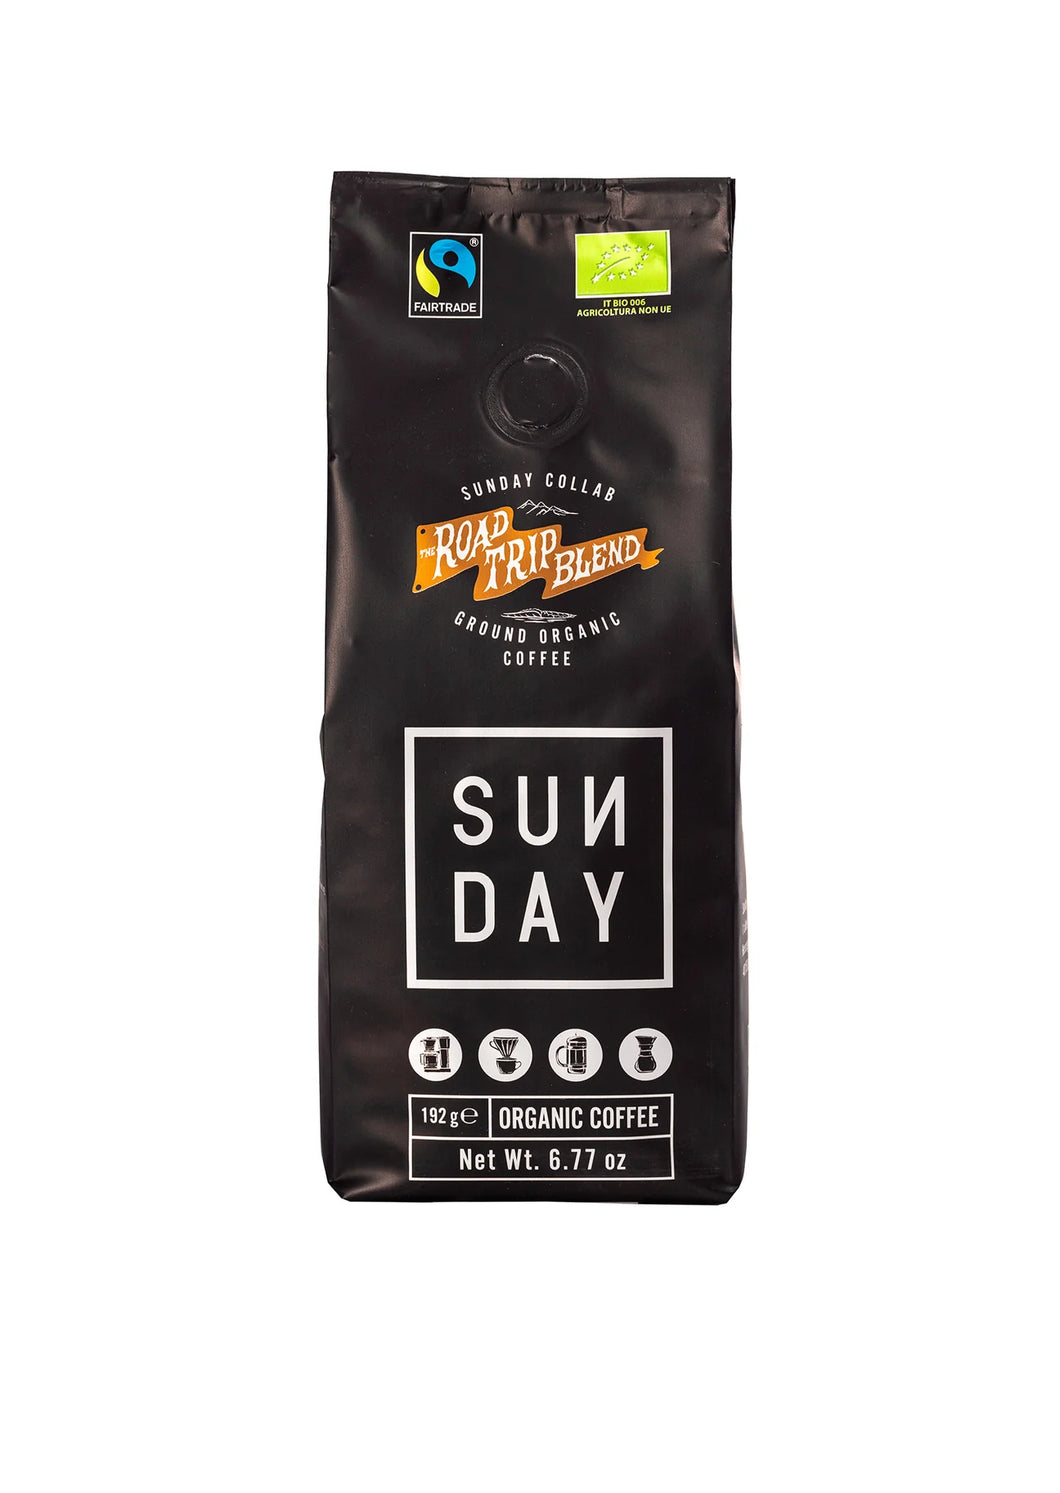 SUNDAY COLLAB 'Road Trip' Filter Coffee - 192g